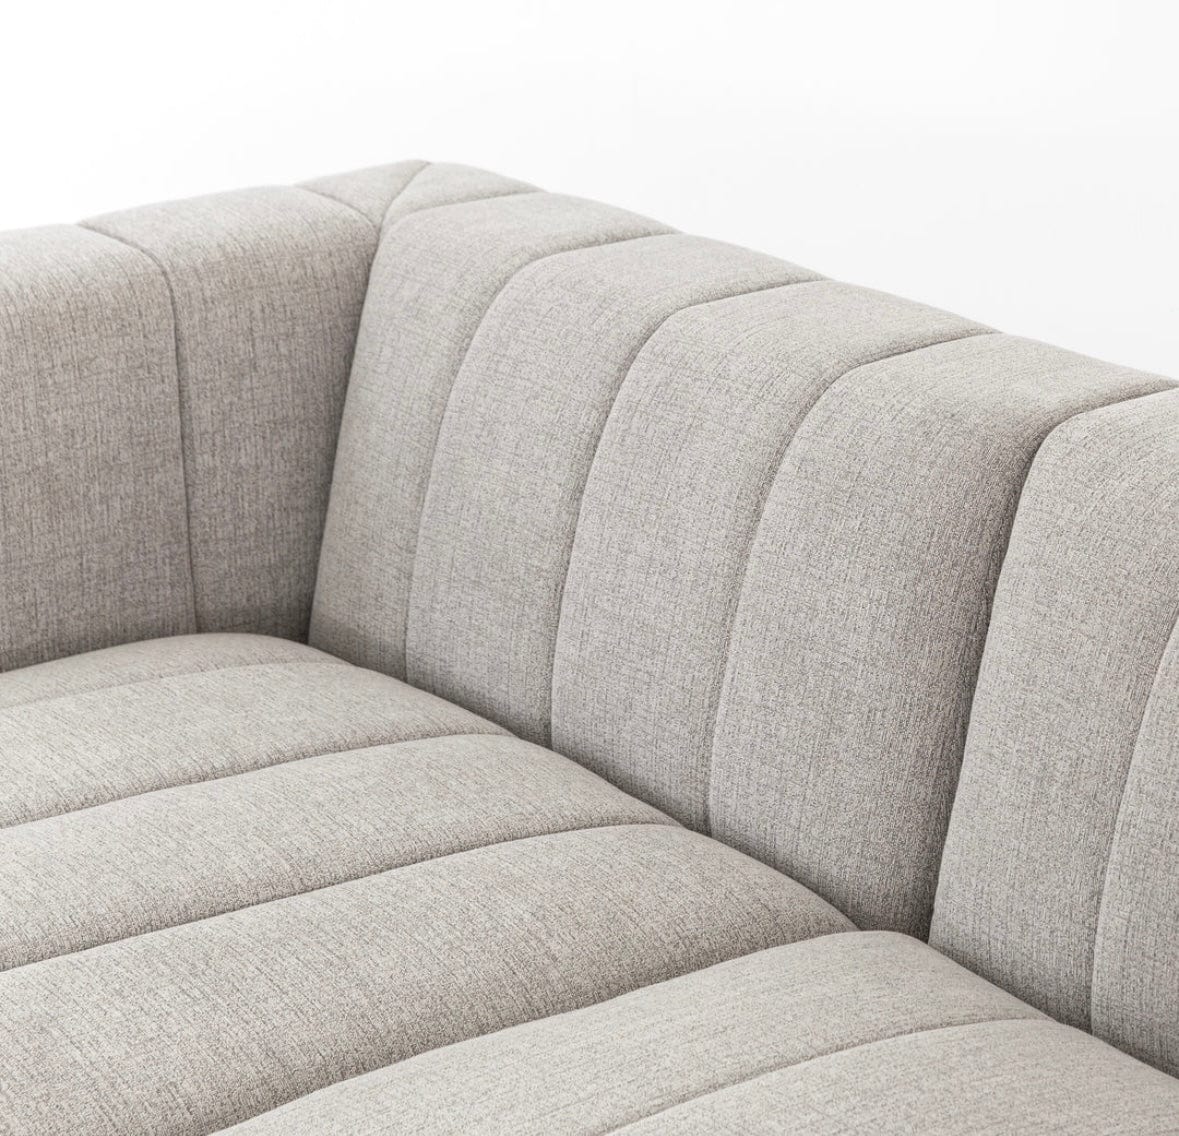 Home Atelier Jerome Sectional Sofa